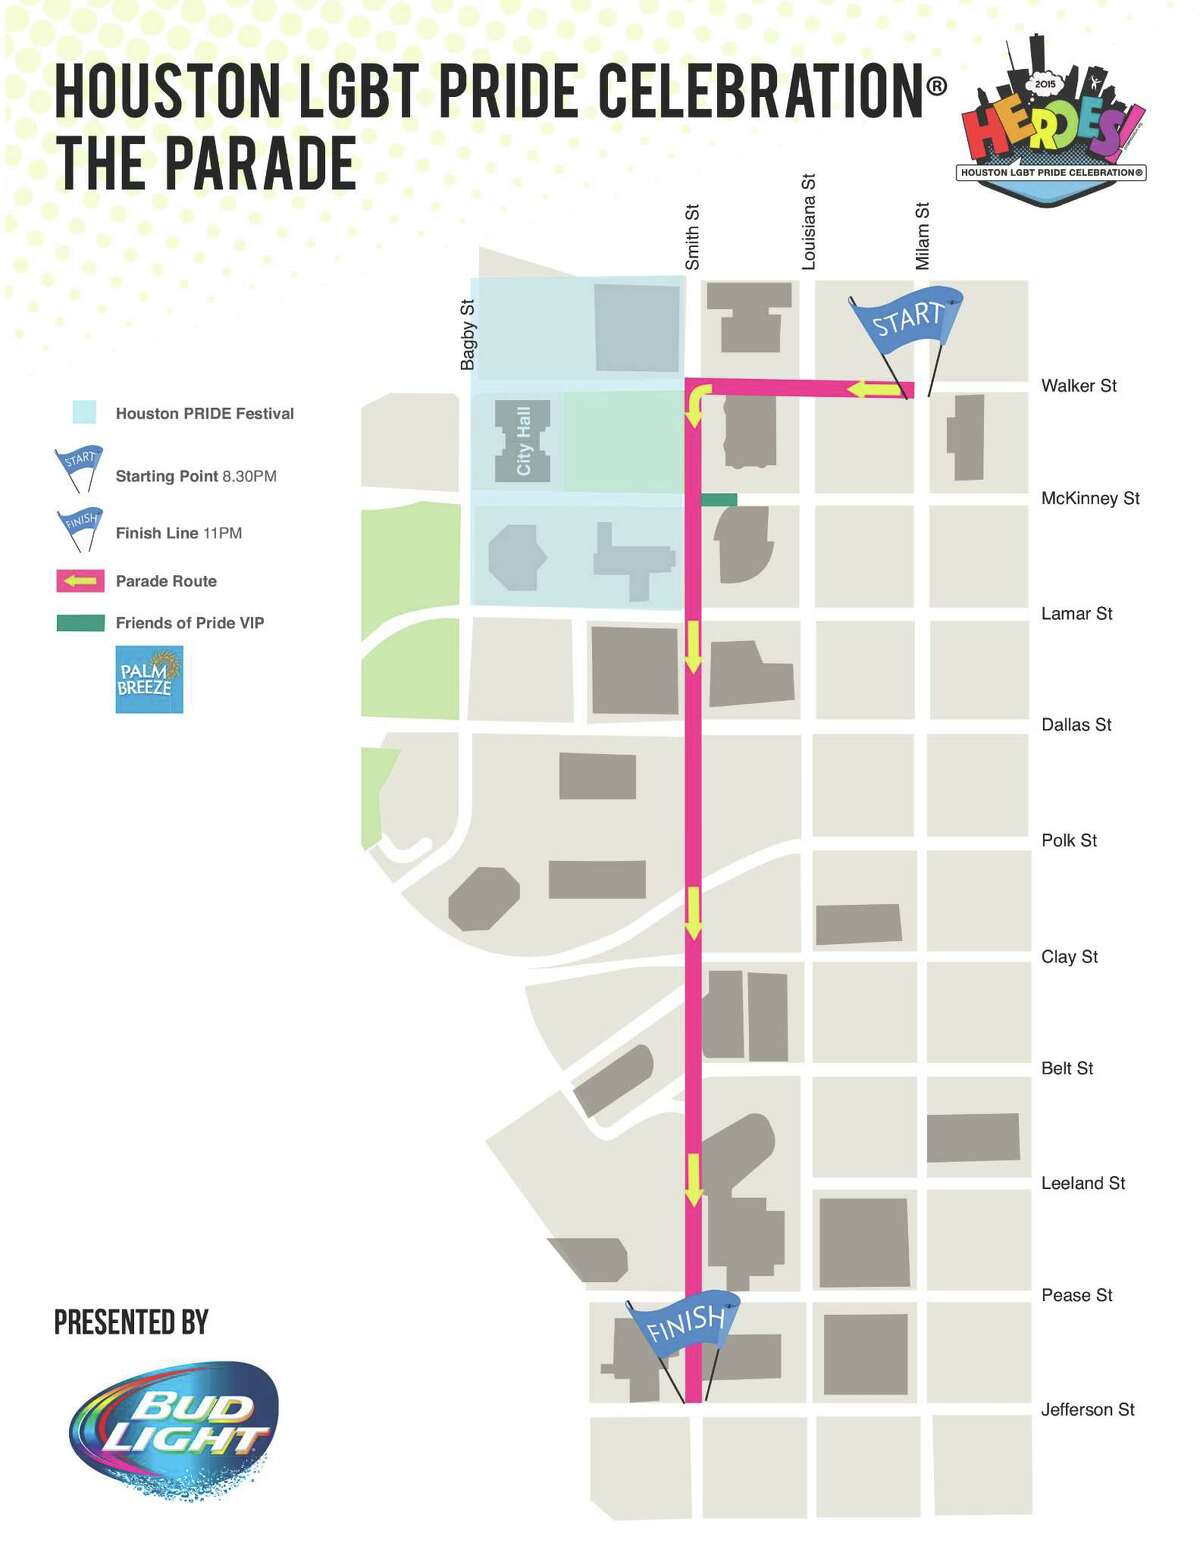 Pride Houston 2015 parade location and route.